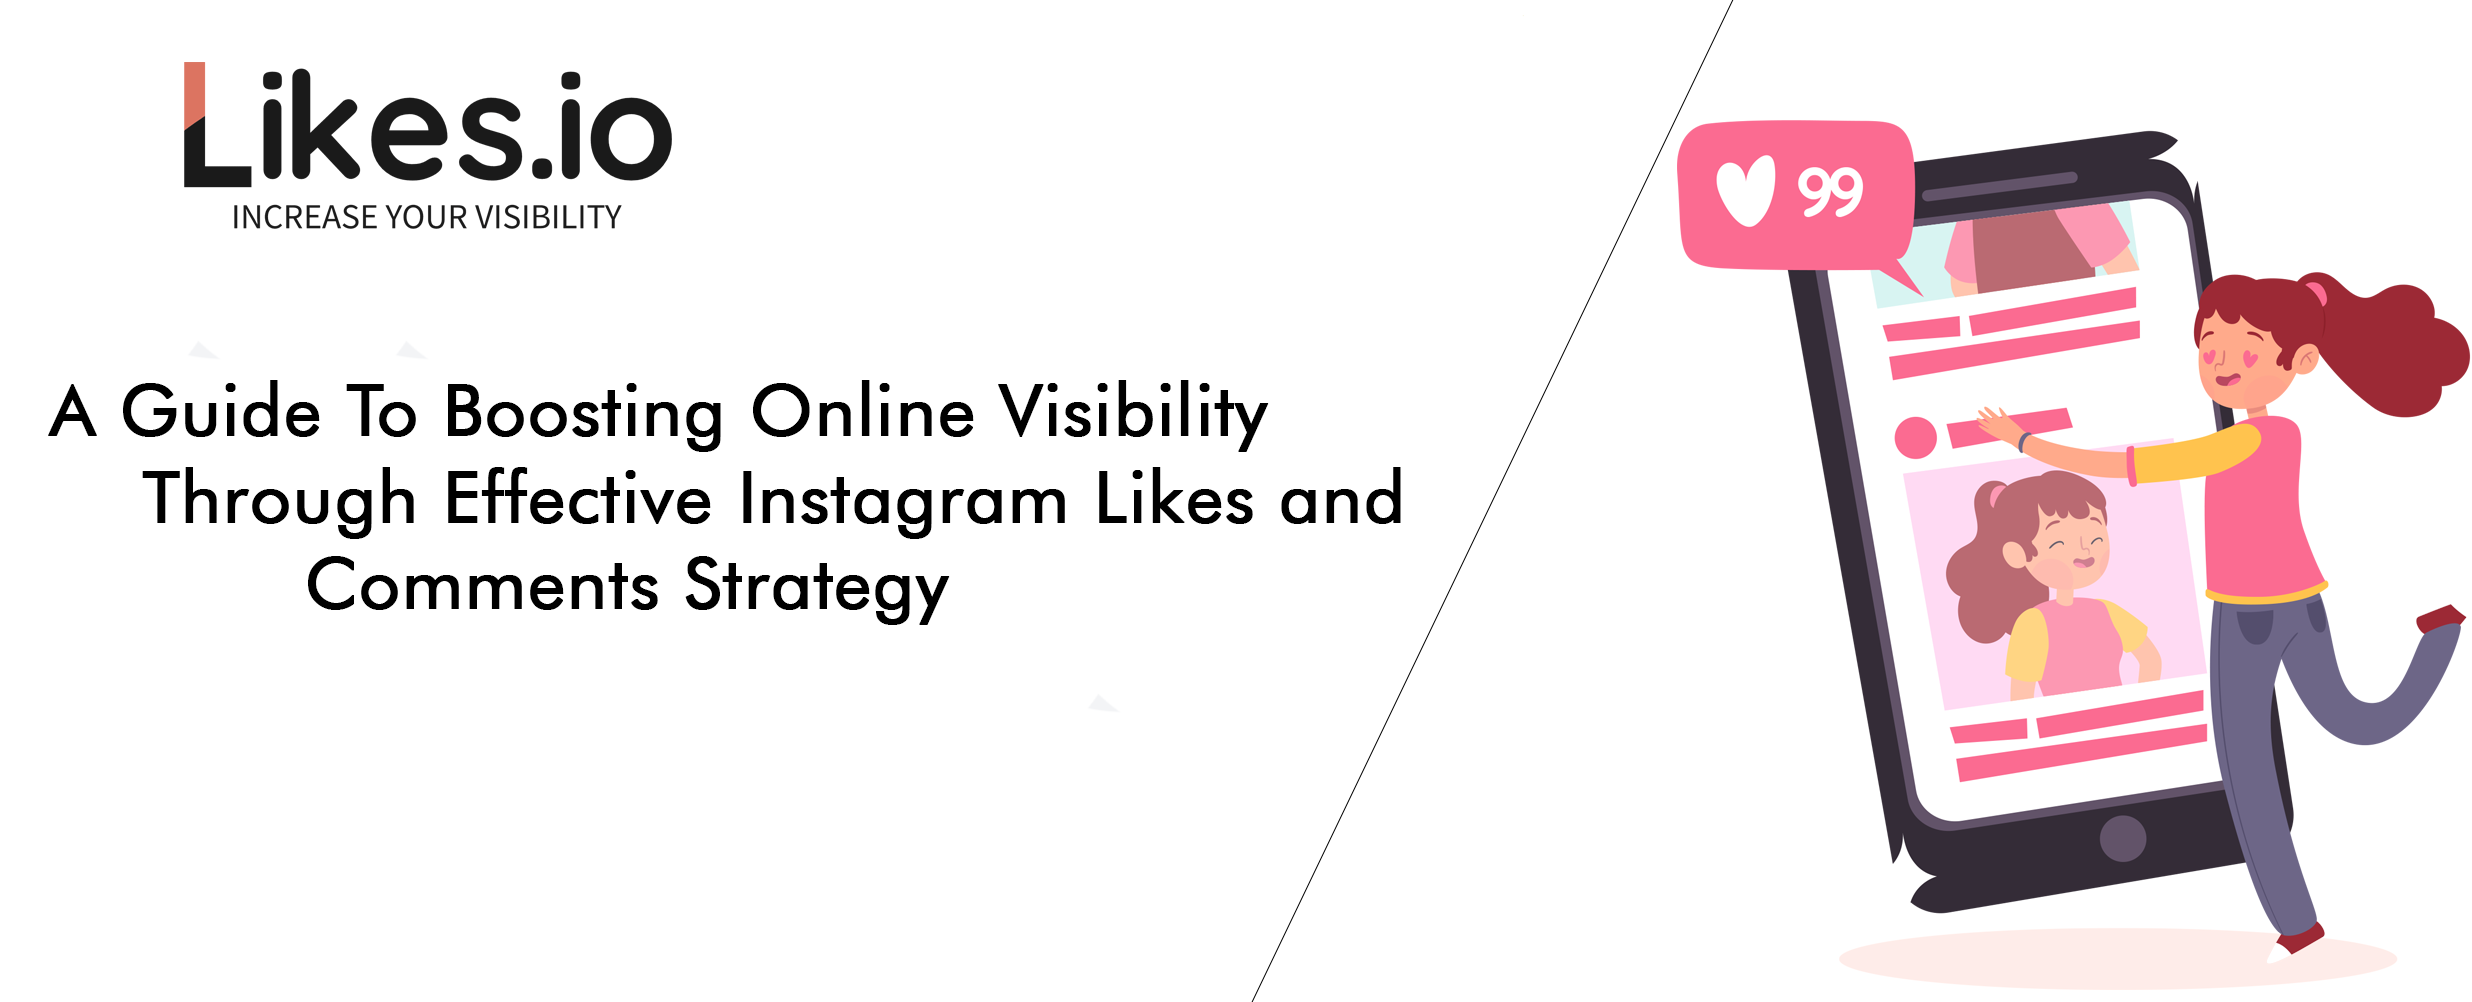 A Guide To Boosting Online Visibility Through Effective Instagram Likes and Comments Strategy